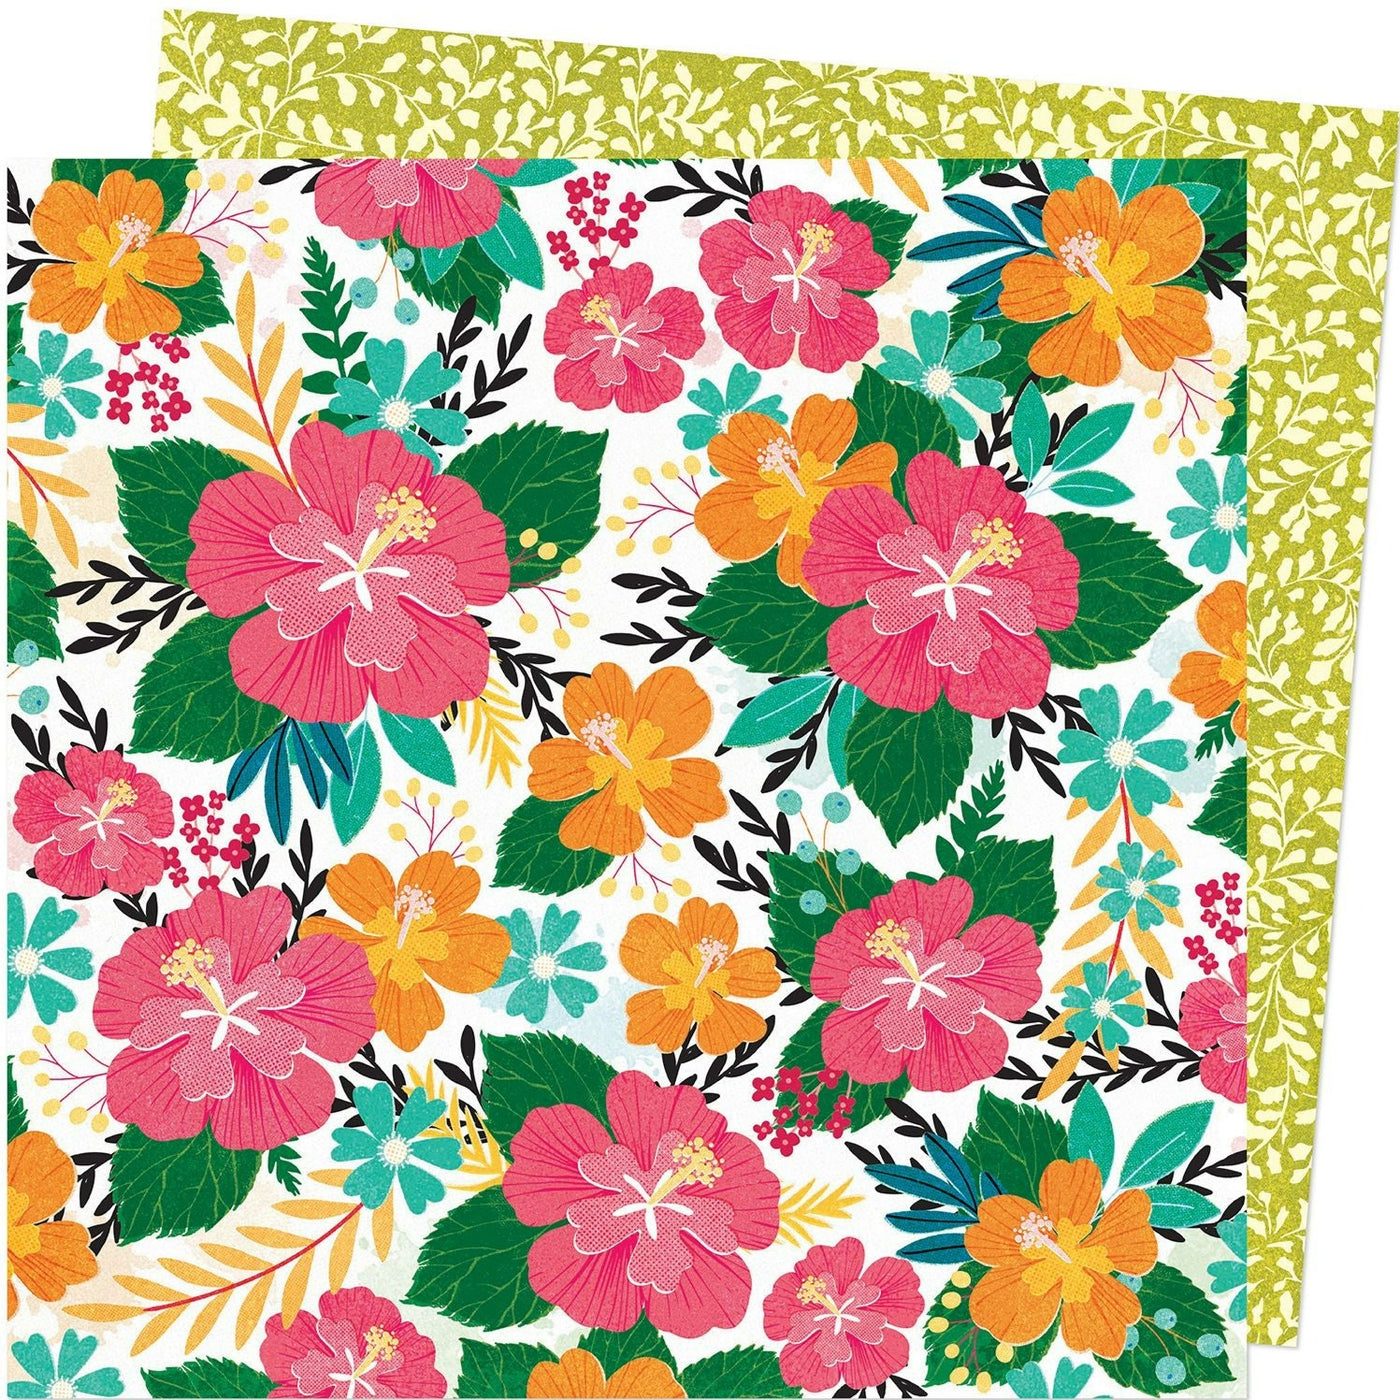 (Side A - beautiful hibiscus and other tropical flowers in pinks, oranges, and  turquoise blue on a white background, Side B - cream-colored vines on an olive green background)